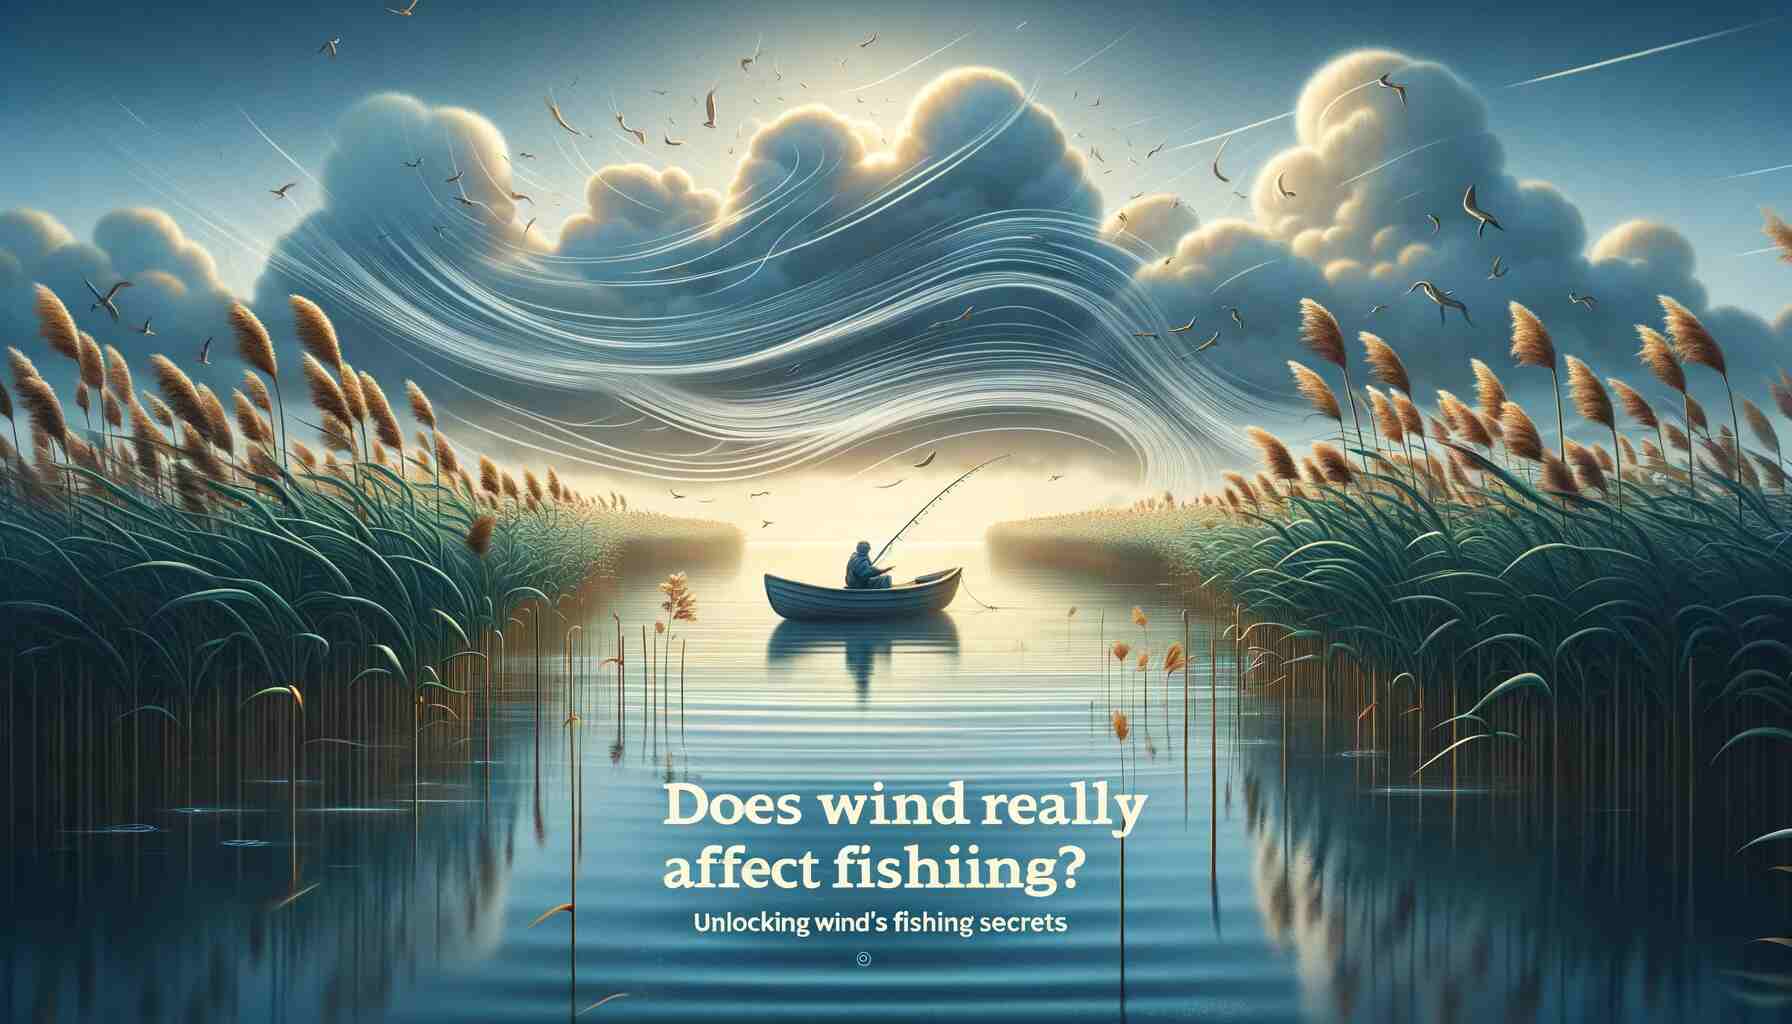 This is the featured image for "Does Wind Really Affect Fishing? Unlocking Wind's Fishing Secrets." The image depicts a serene lake with a fisherman in a boat, surrounded by reeds, under a sky filled with clouds, highlighting the impact of wind on the fishing environment.